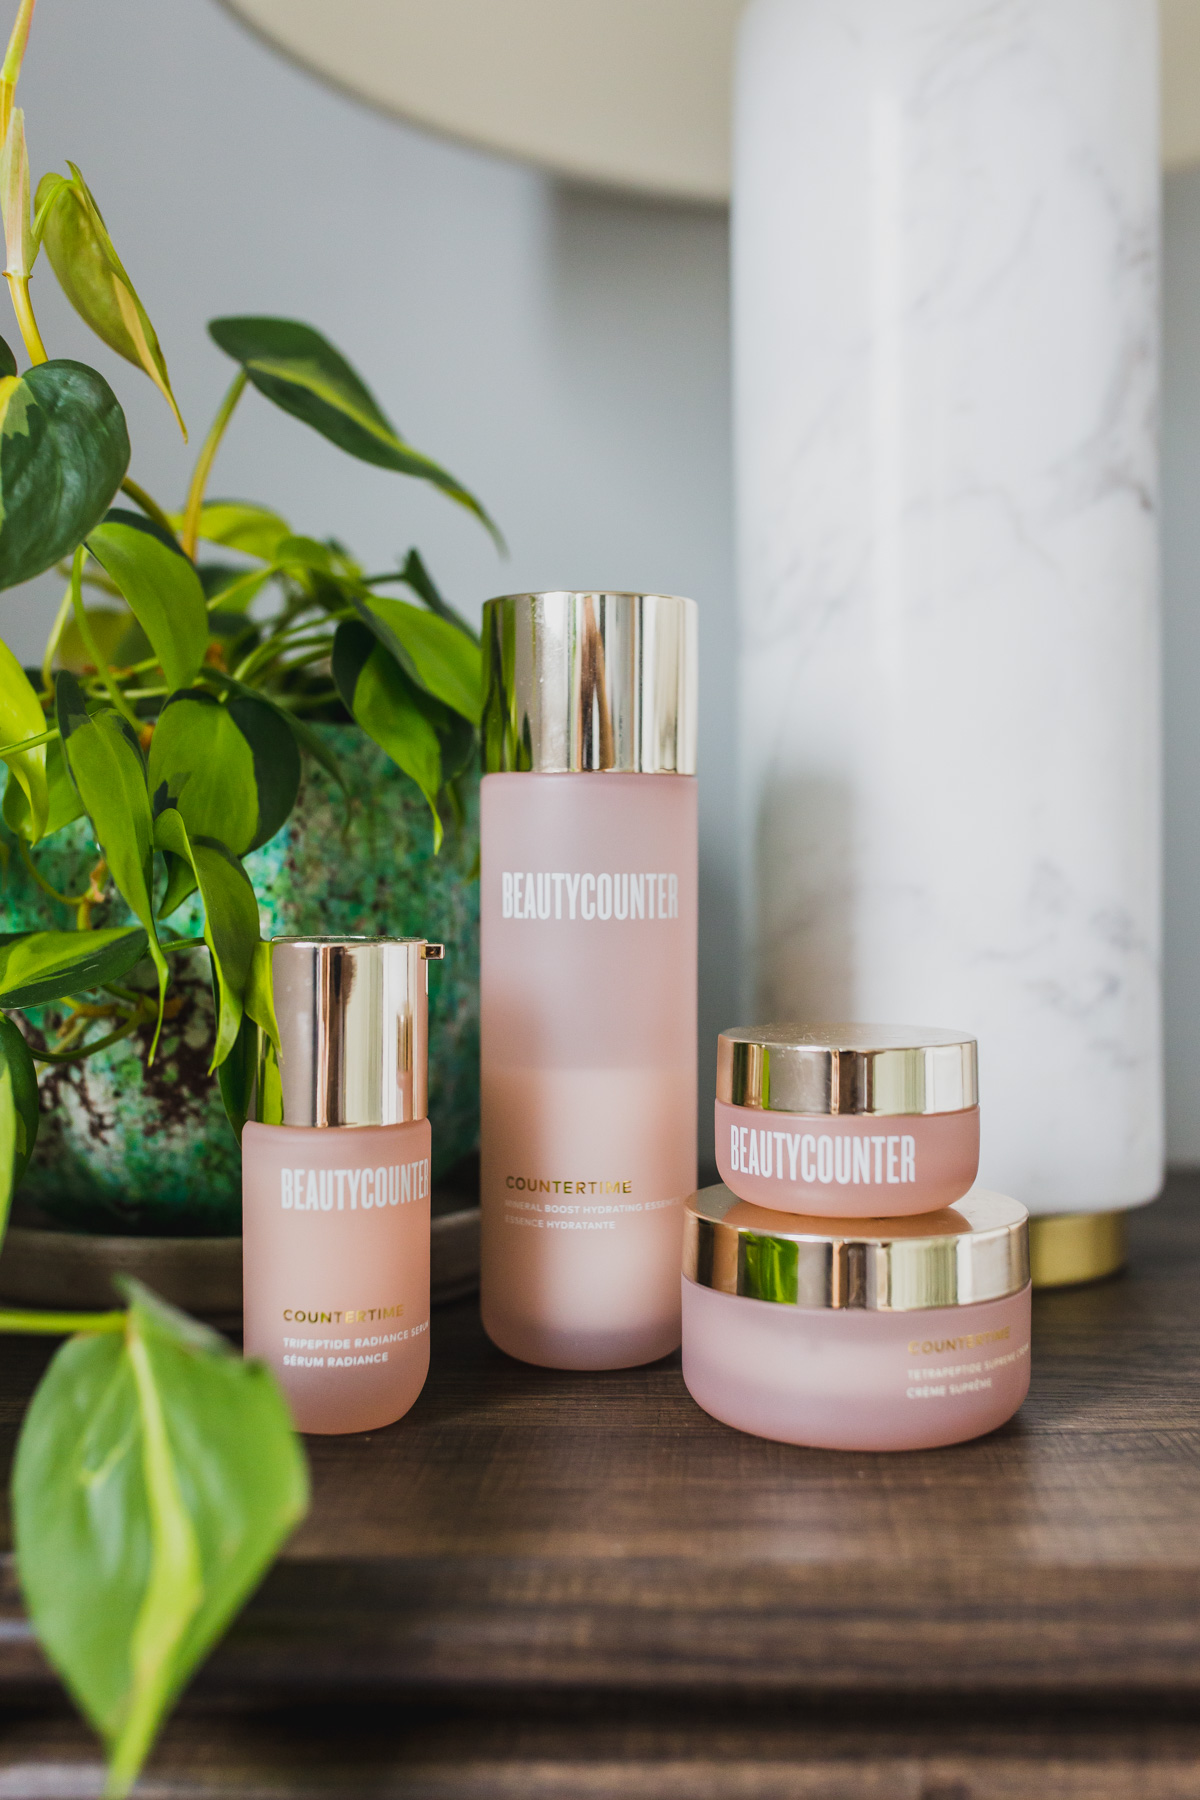 The Beautycounter Countertime regimen is one of the best anti-aging skin products and is considered a safe beauty product for pregnancy. The bakuchiol benefits are similar to retinol, but non-irritating and safe for pregnancy. This clean beauty skin care product has completely changed my skin—here